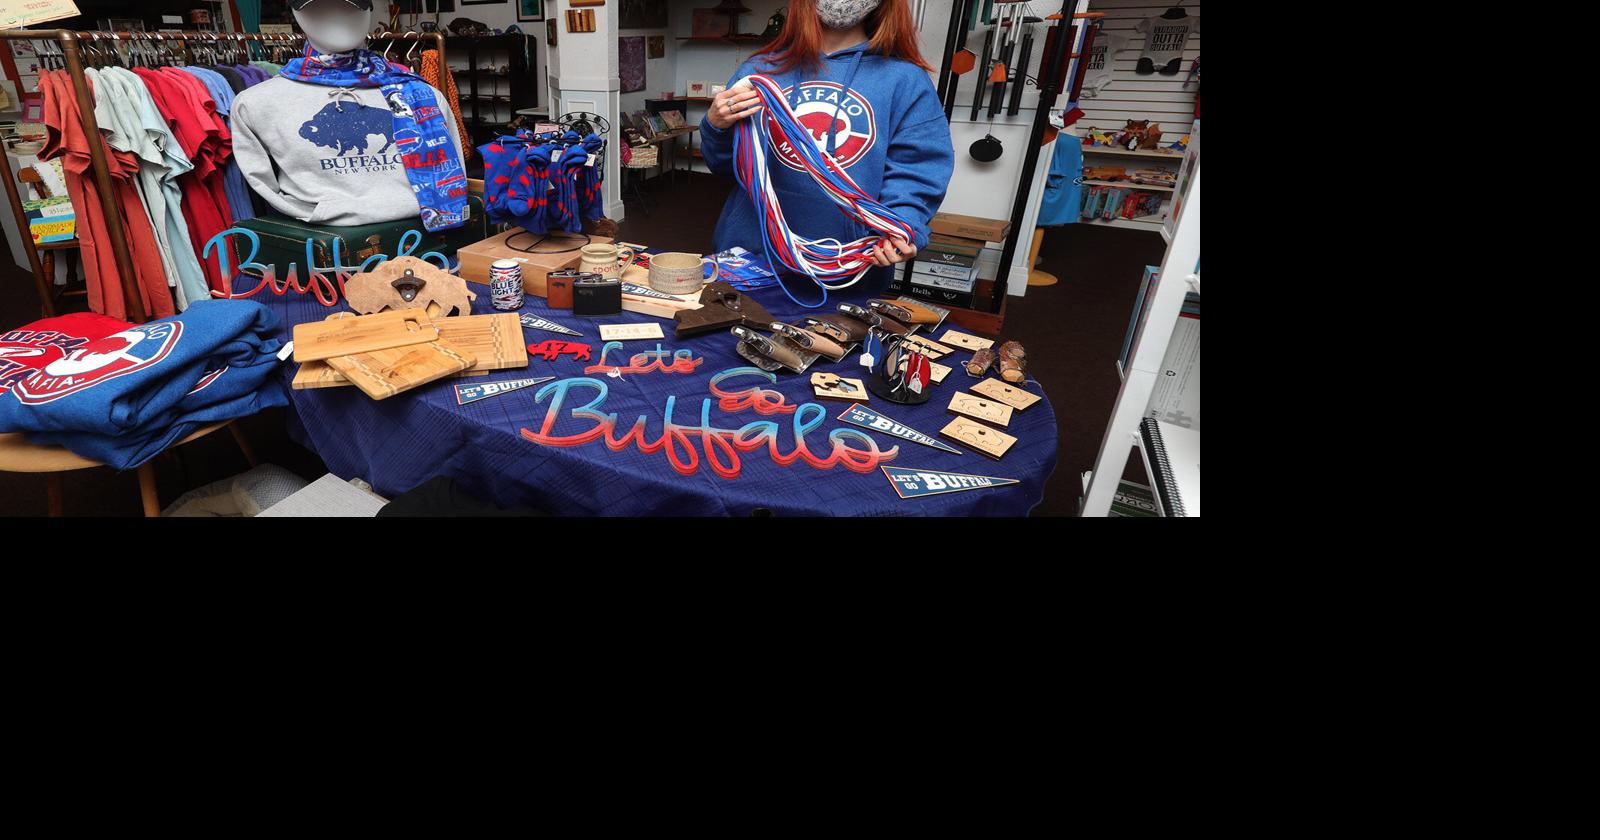 In the quest for Bills merchandise, sellers find creative ways to dodge  trademarks